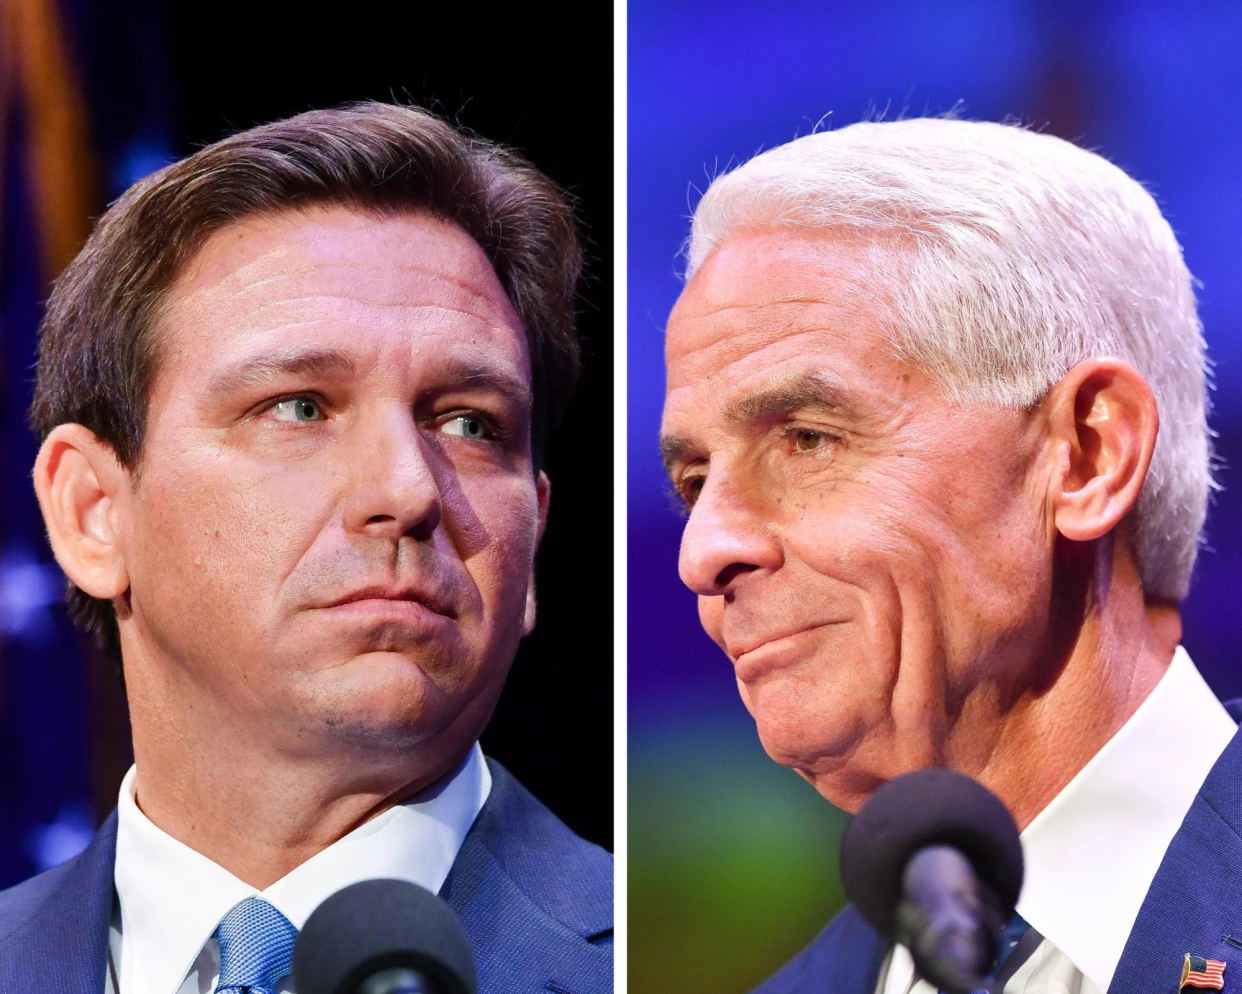 Incumbent Florida Gov. Ron DeSantis (left), R, and former Gov. Charlie Crist, D, are pictured during a gubernatorial debate at the Sunrise Theatre in Fort Pierce, Fla., on Monday, Oct. 24, 2022.